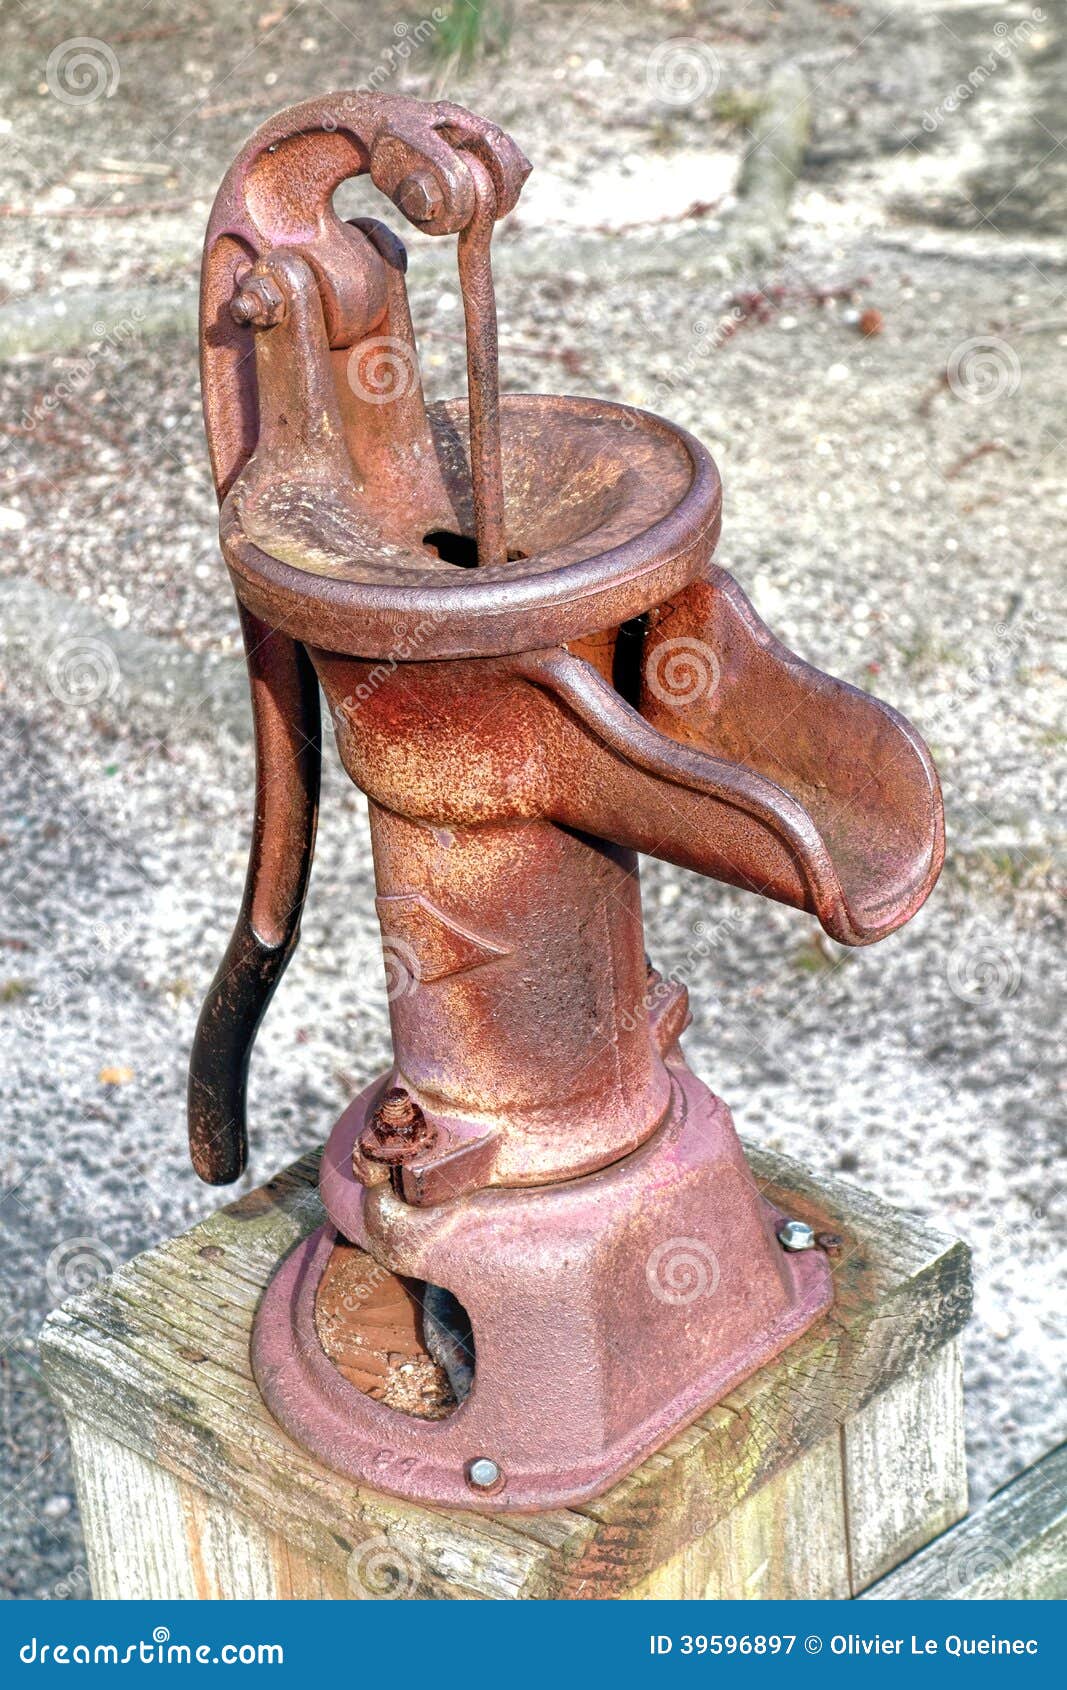 Antique Rusty Manual Water Fountain Pump And Crank Stock Image - Image